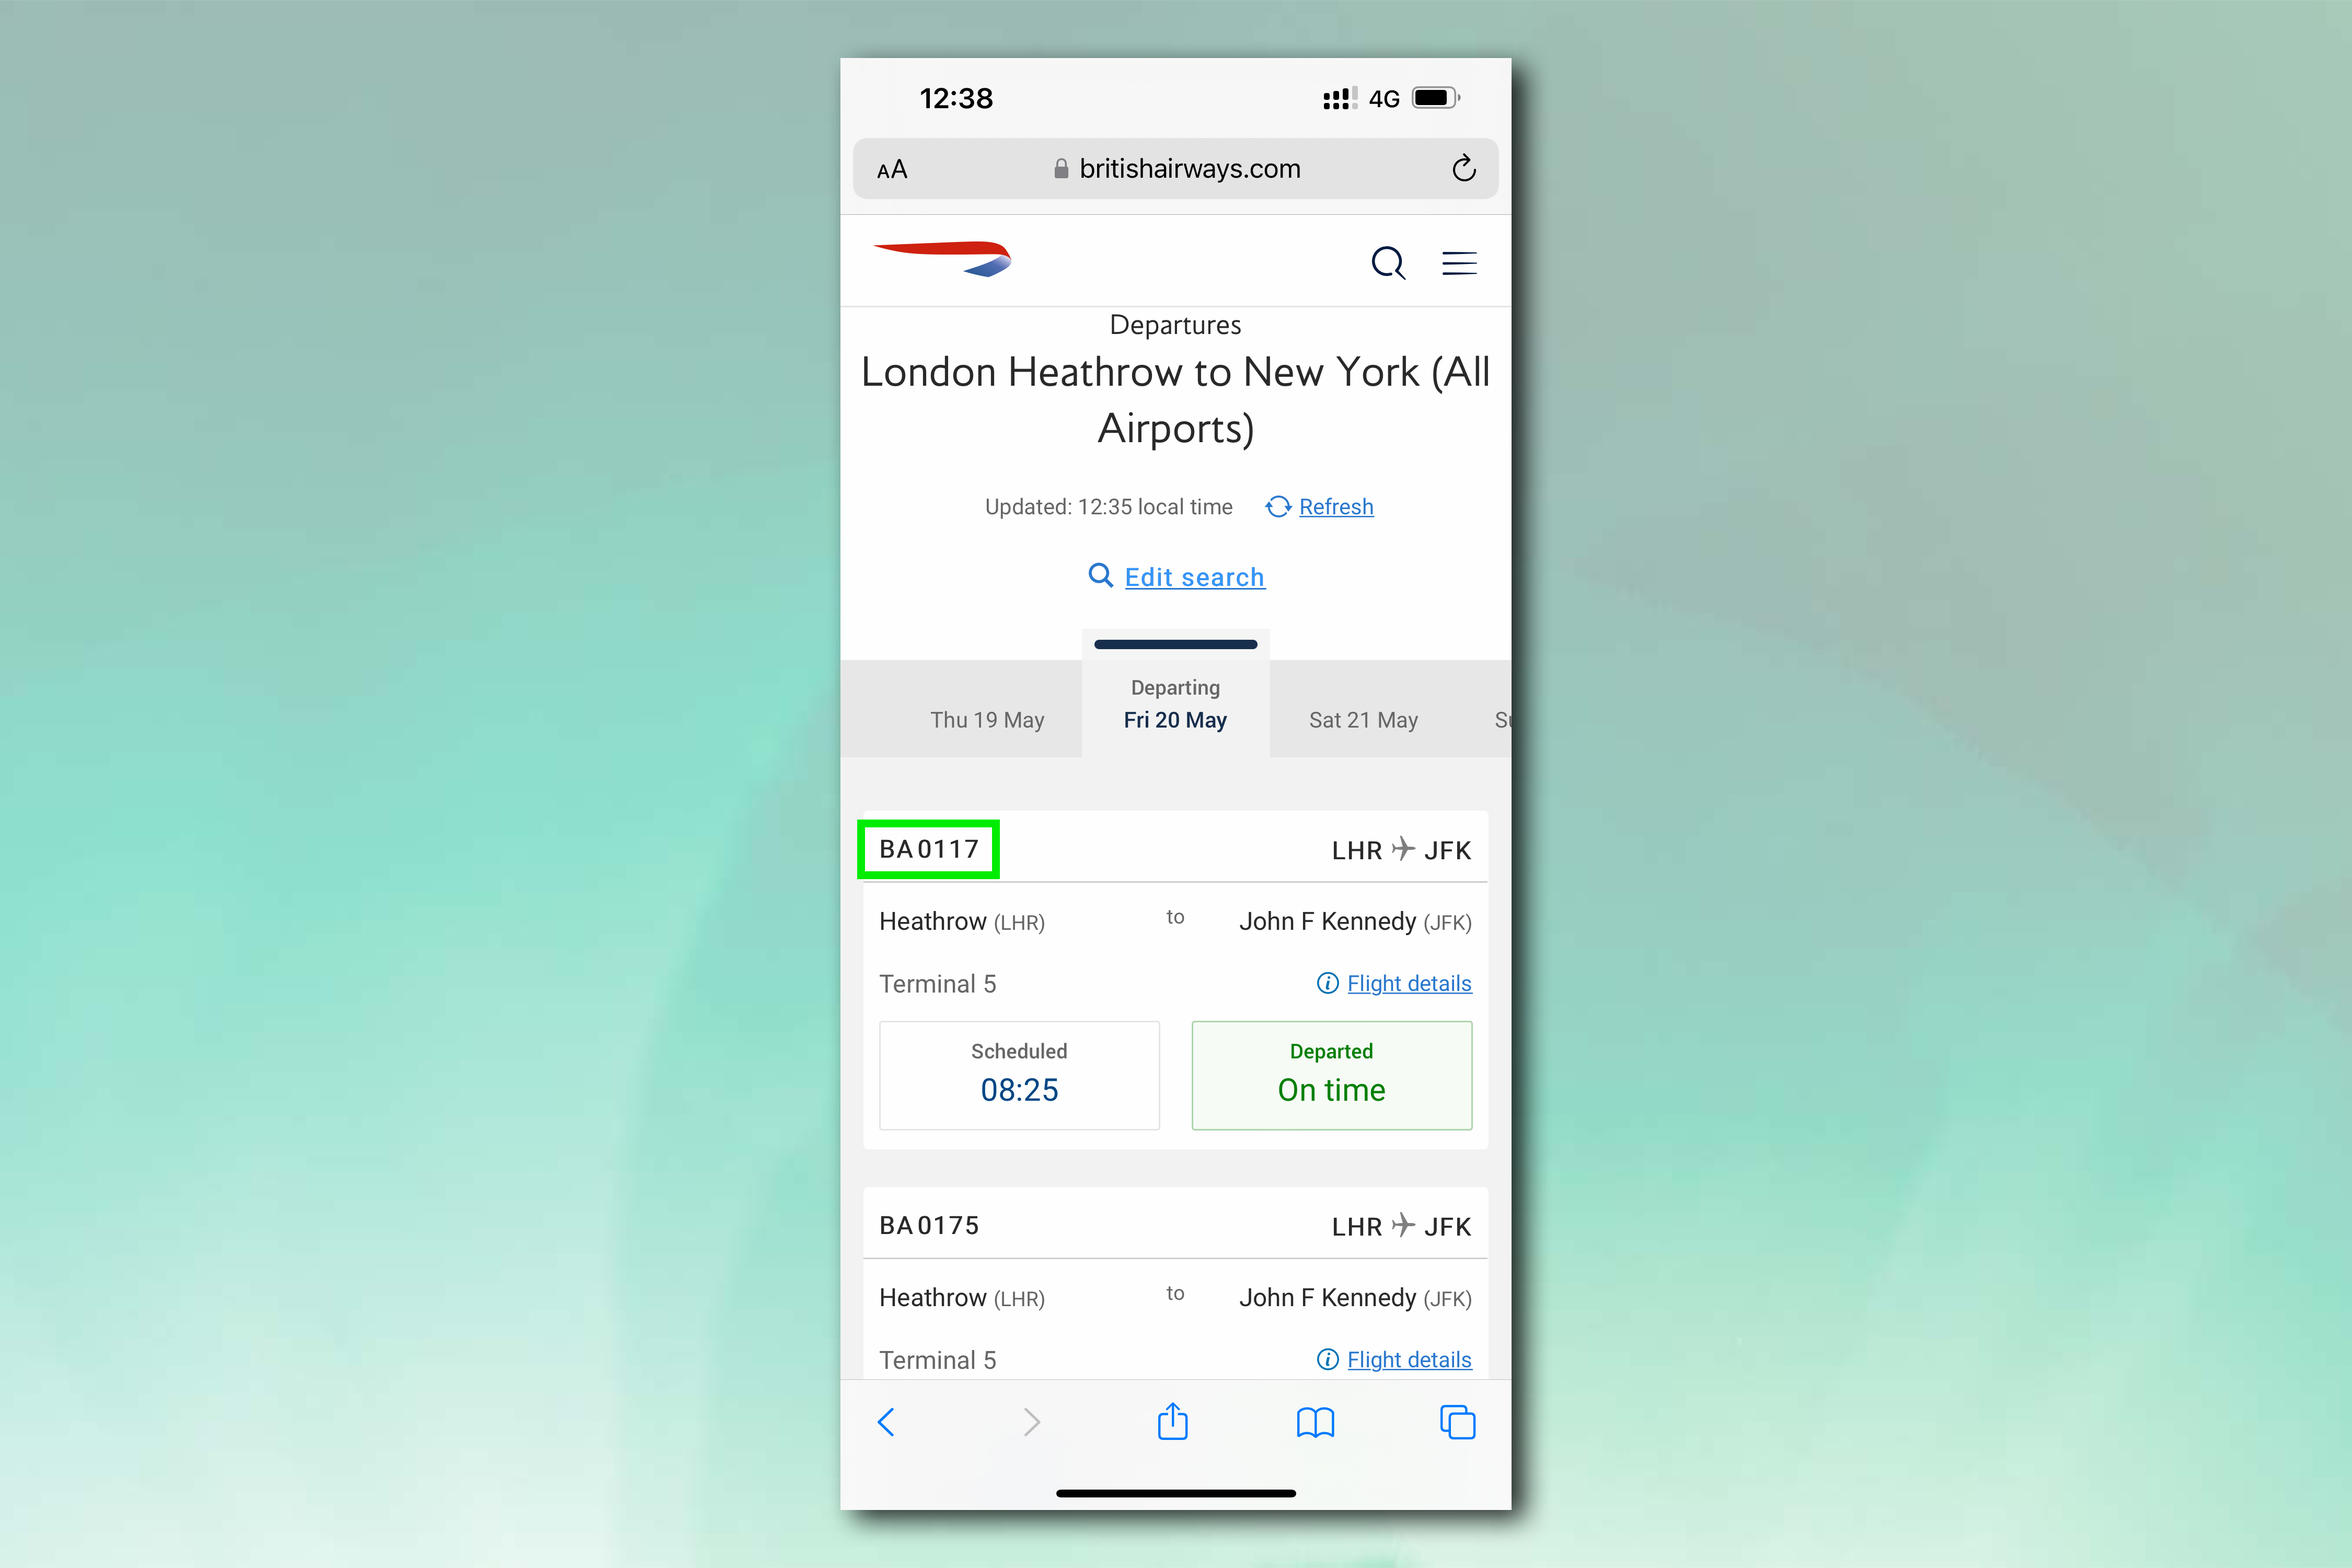 A screenshot showing the British Airways website with a flight number highlighted. The screenshot is set against a green background.